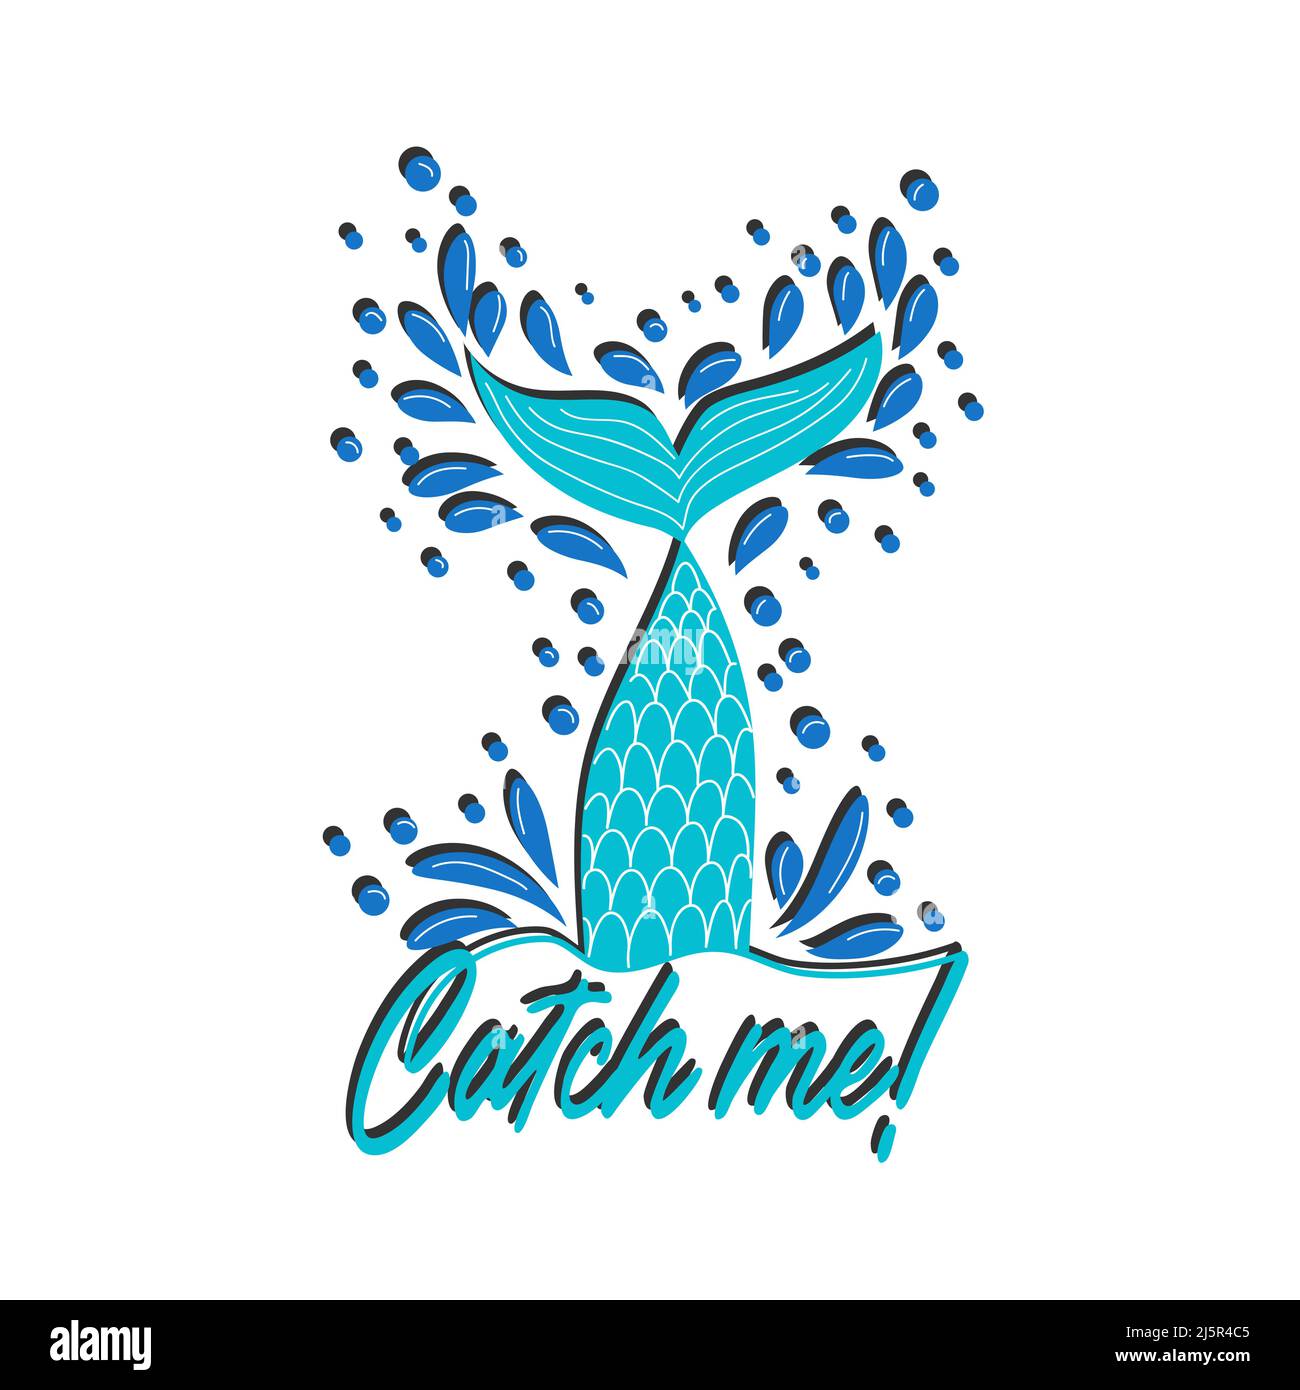 Quote about mermaids and mermaid tail with splashes. Inspirational quote about the sea. Mythical creatures. Stock Vector